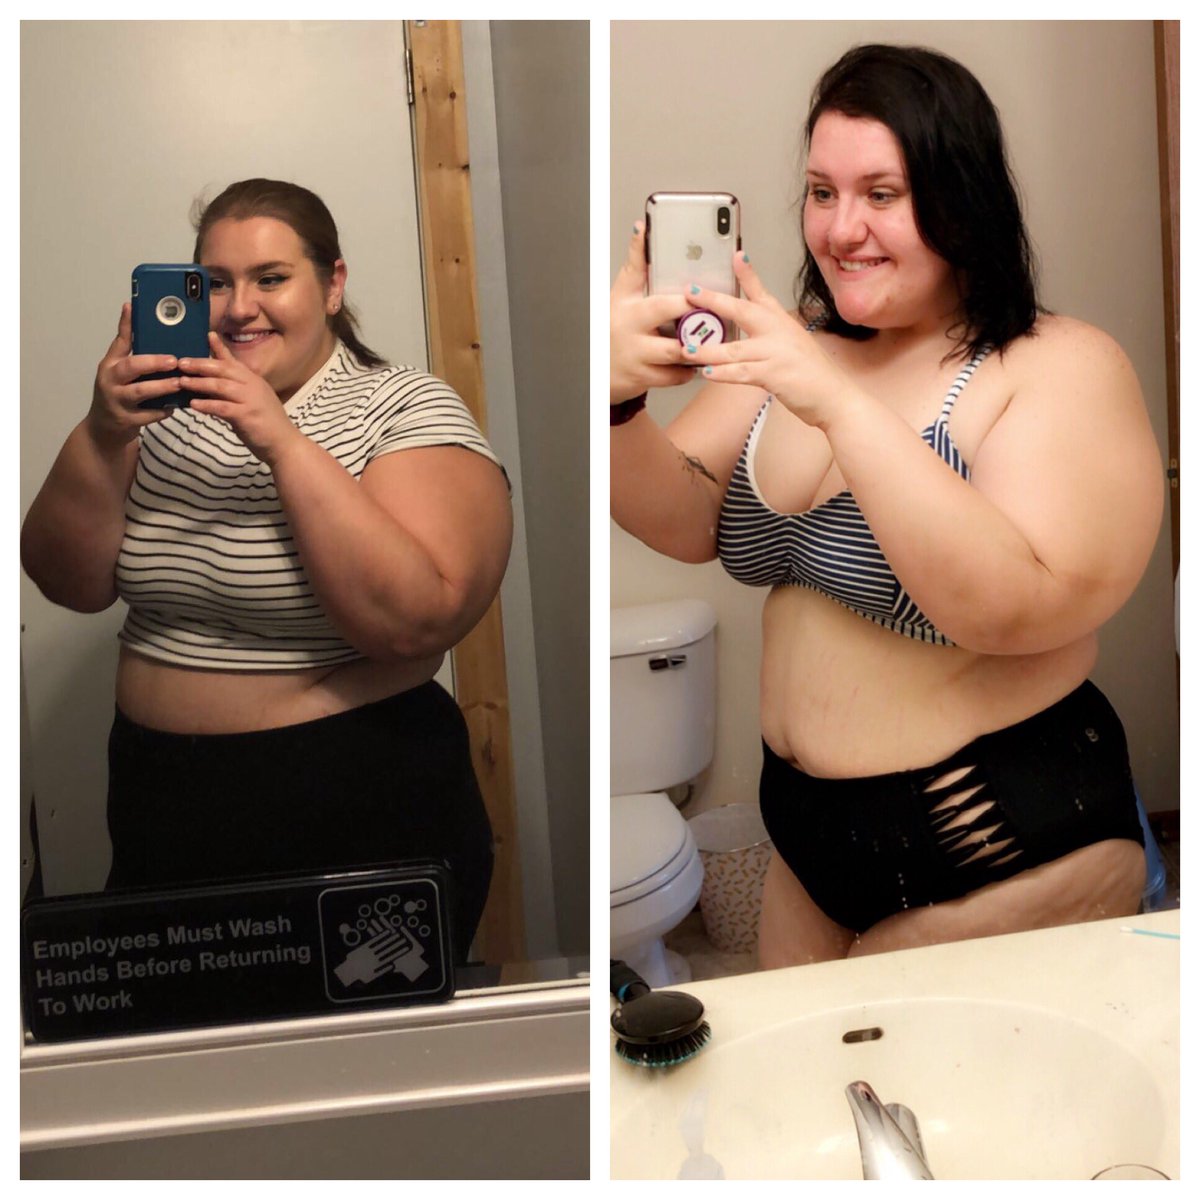 hi I’m pretty proud of myself and how much weight I’ve lost in a year so here’s a pic to compare myself last year vs this year :) I still have a long way to go but progress is progress! #weightlossjourney #80lbsdown